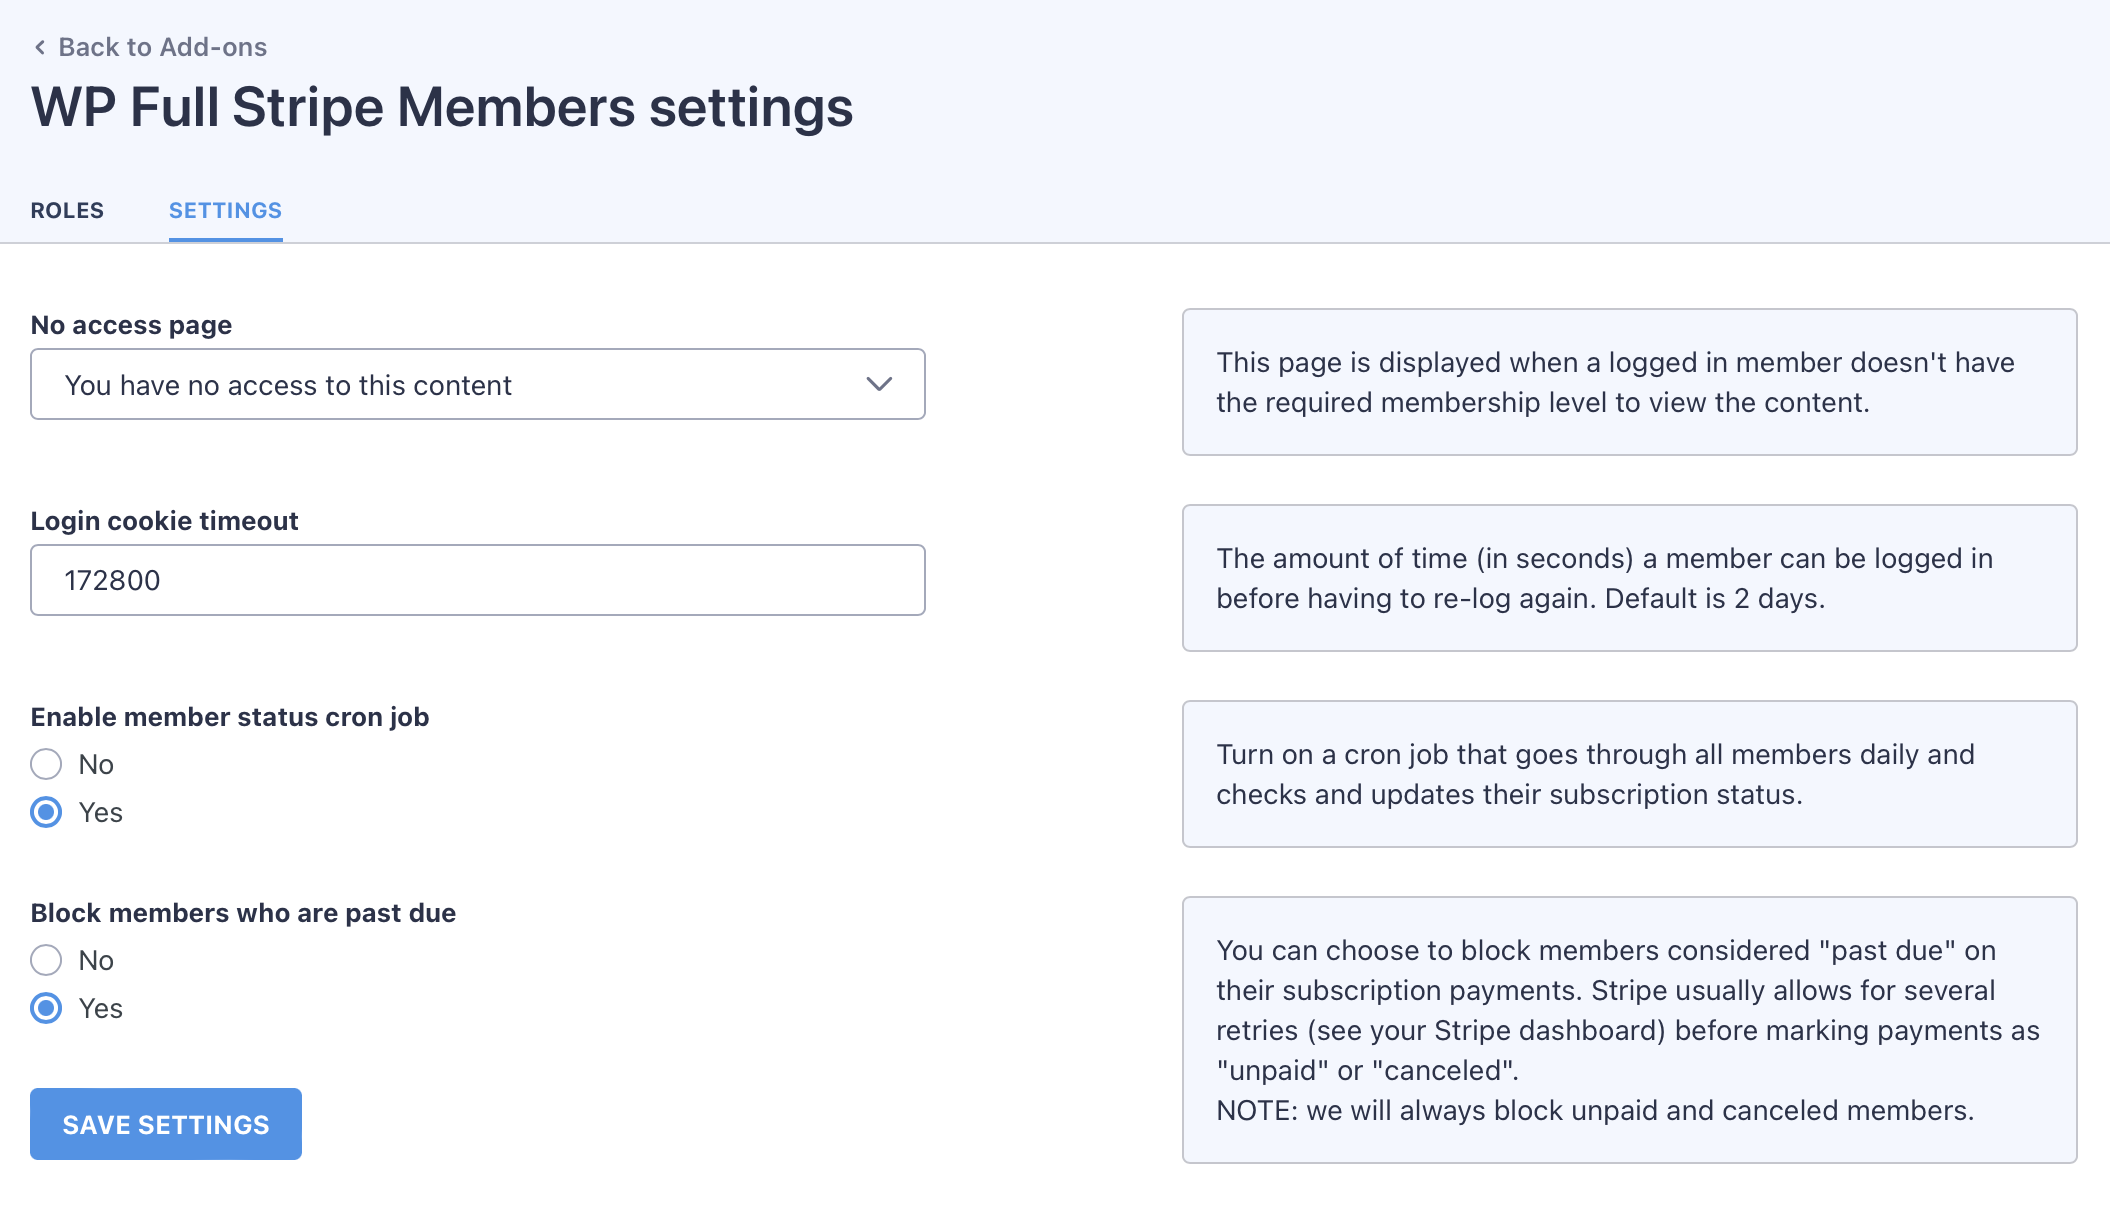 WP Full Stripe Members - Change the settings for the add-on